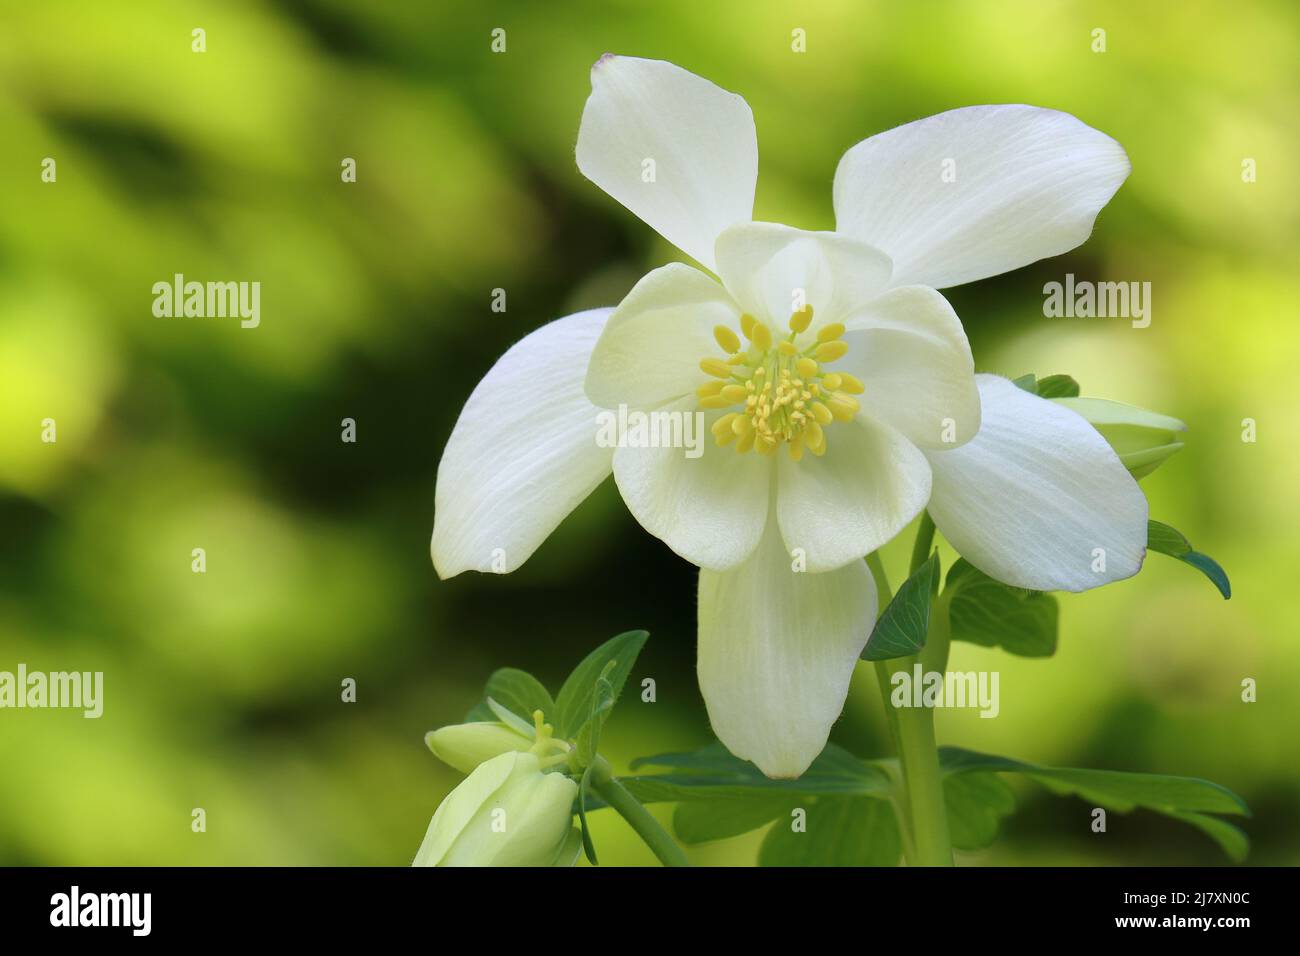 close-up of a beautiful white columbine with a direct view of the open flower against a green sunlit background, copy space Stock Photo